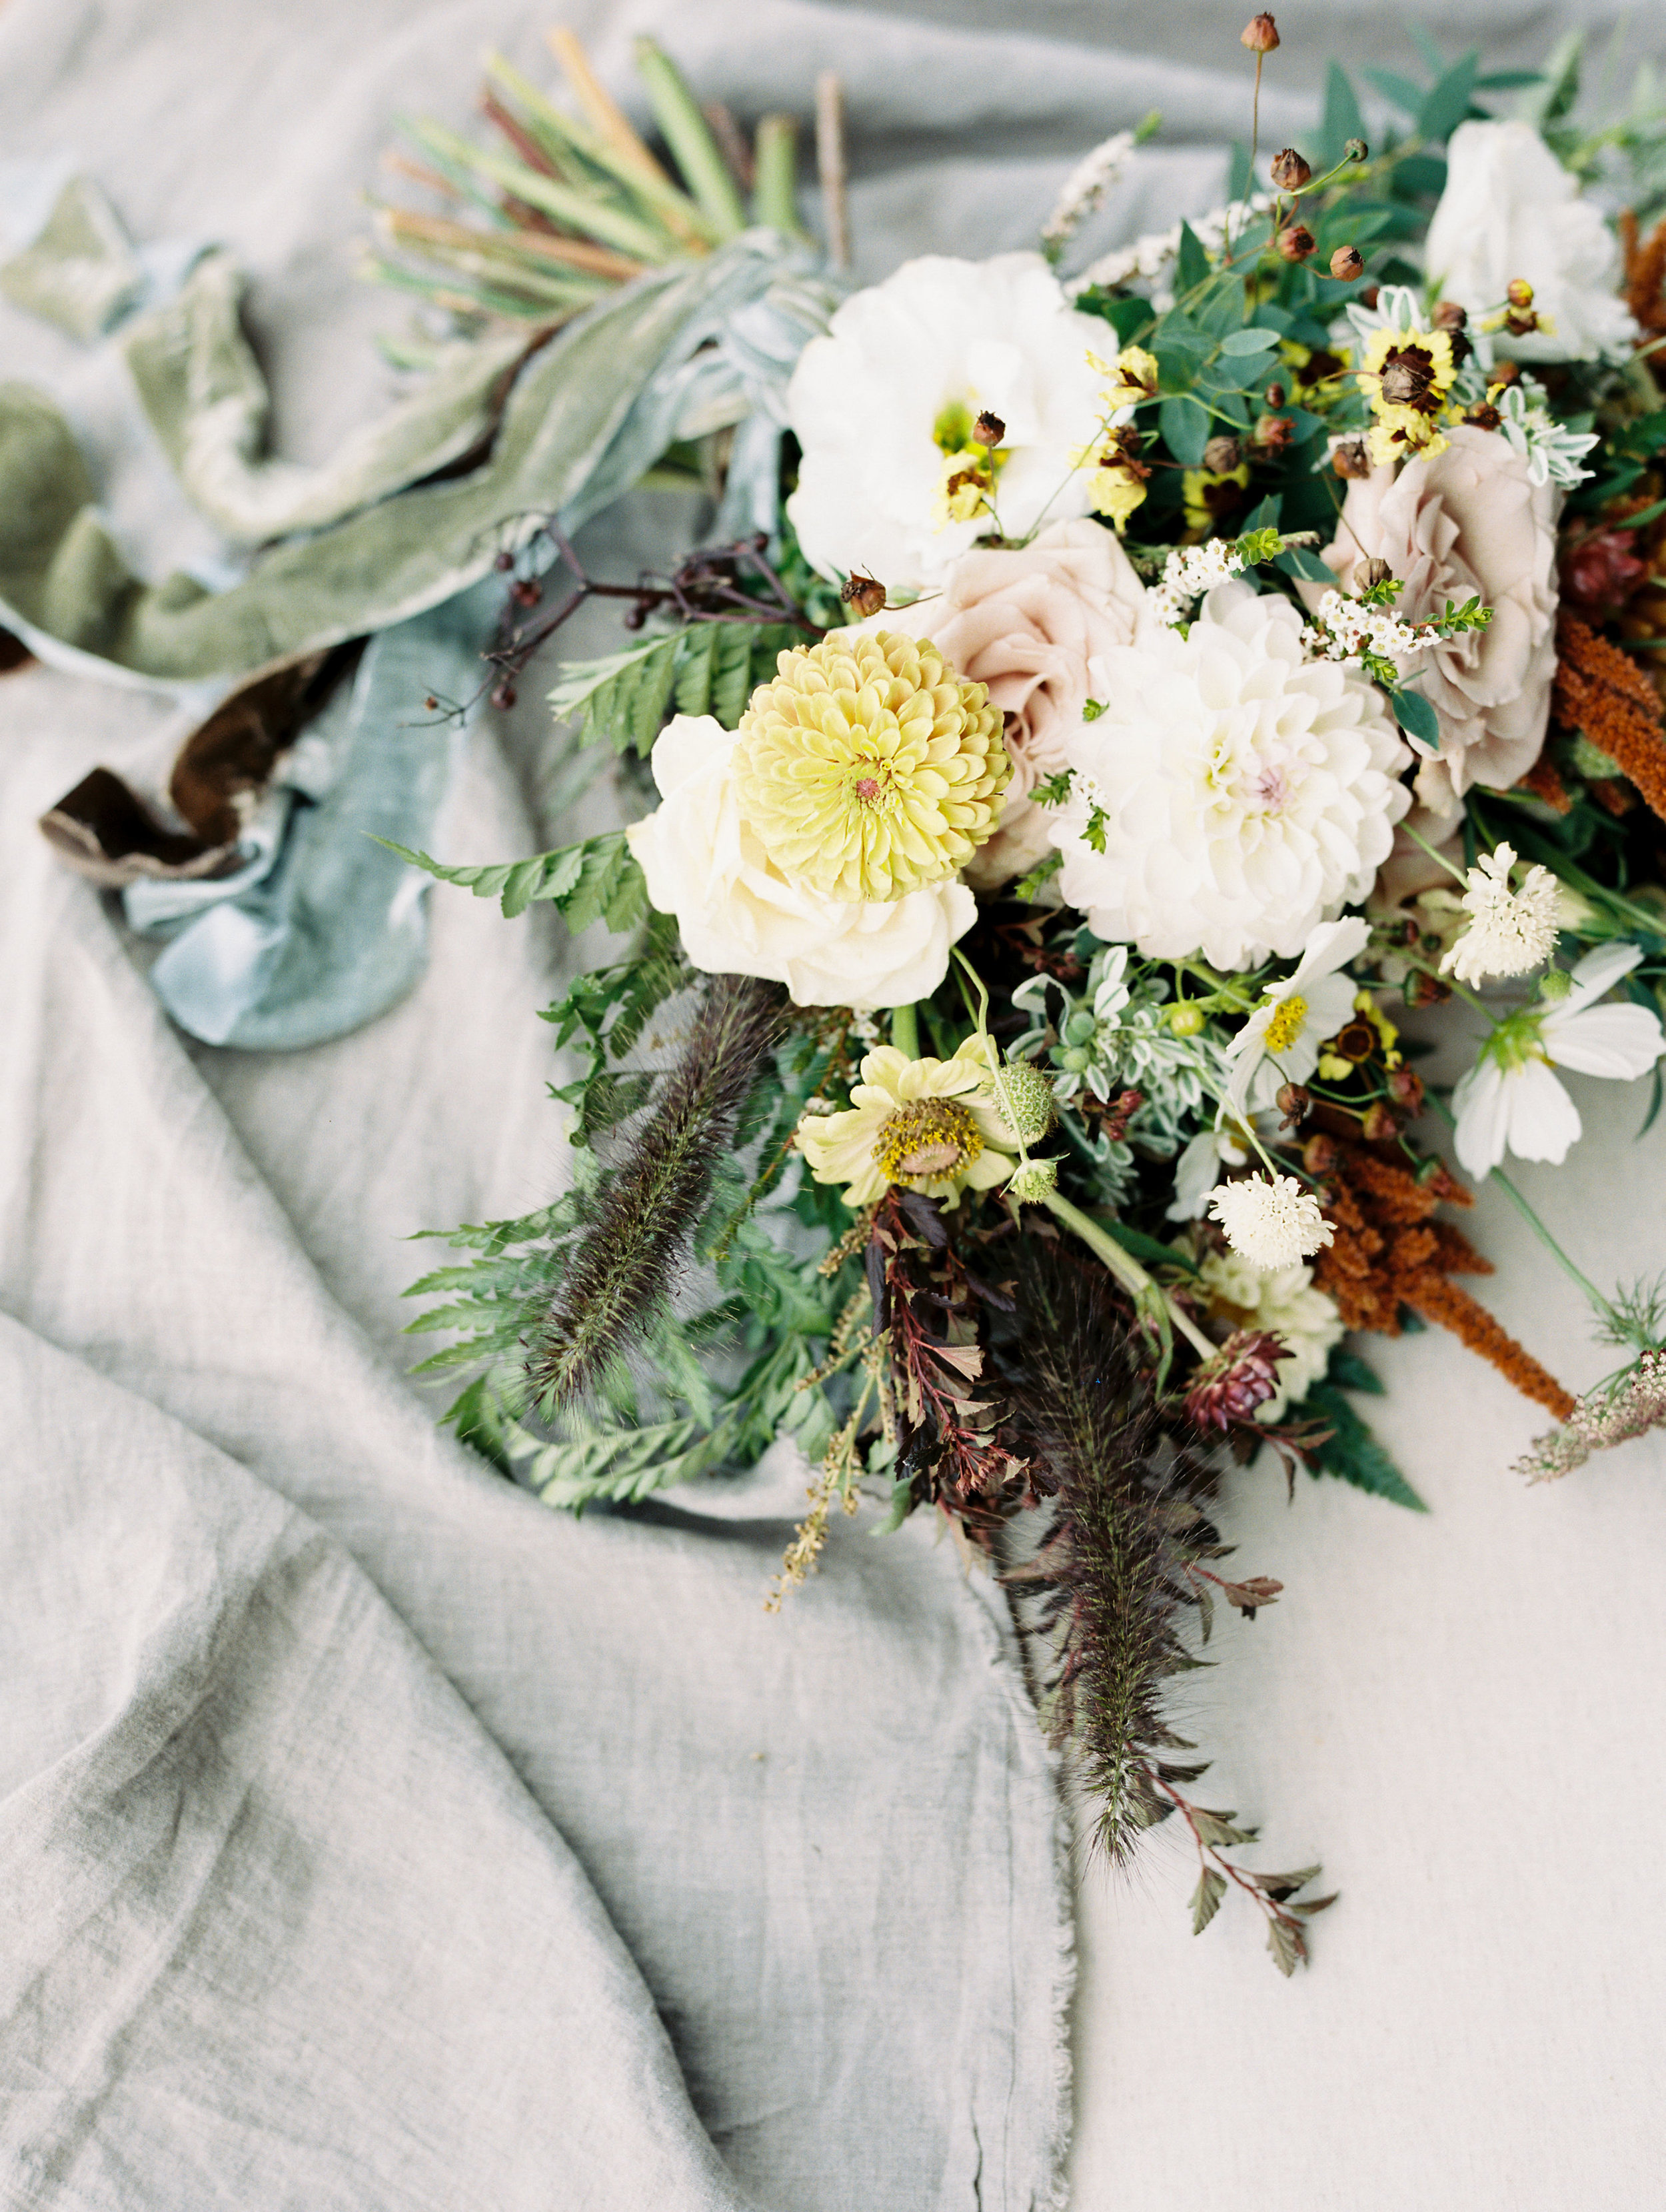 Lush bridal bouquet in muted hues with wildflowers, greenery, and garden roses. Tennessee Wedding Florist.